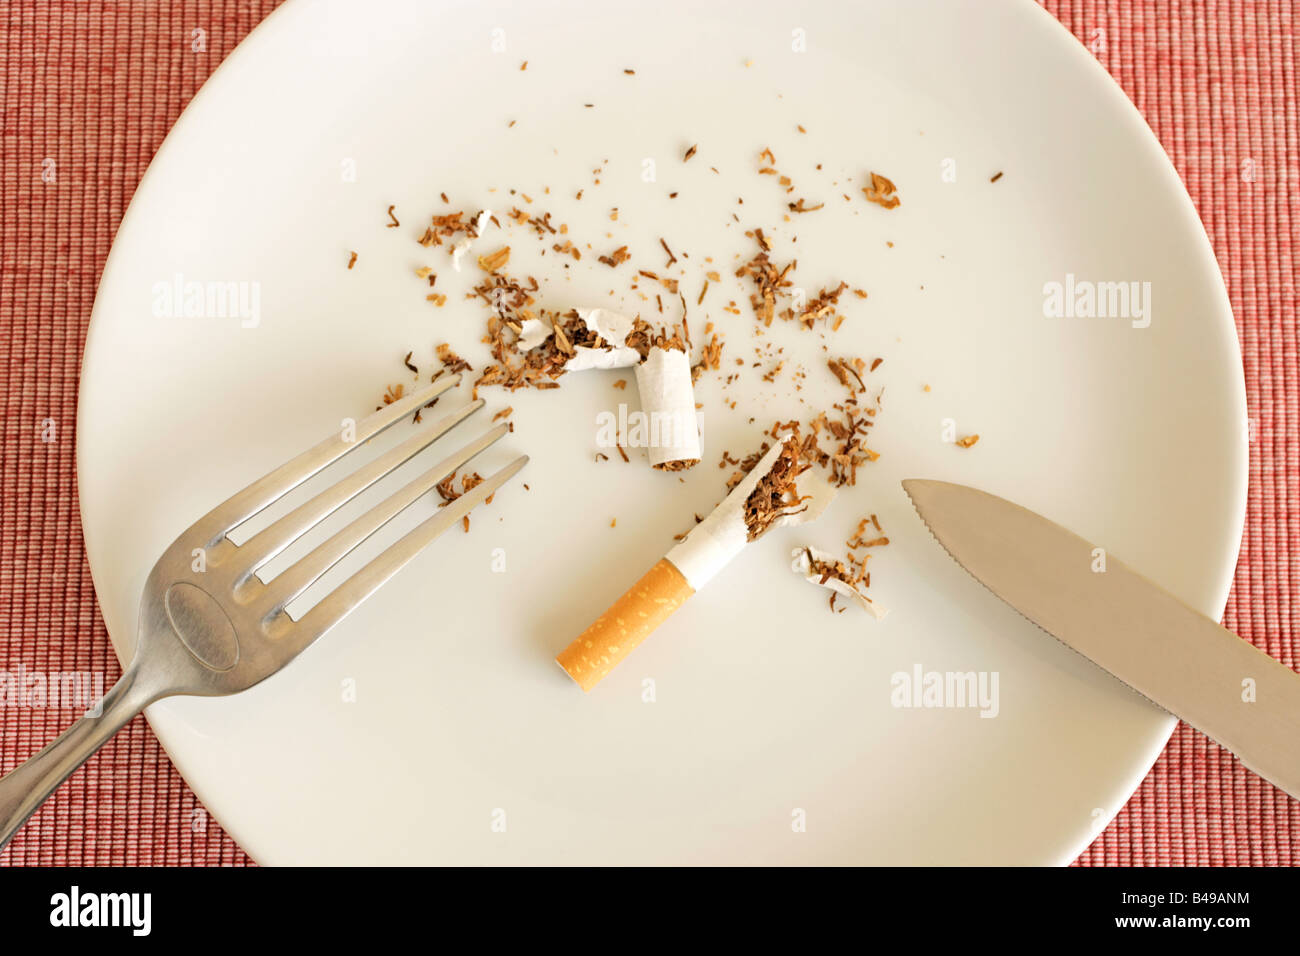 Torn up cigarette on plate with knife and fork Stock Photo - Alamy